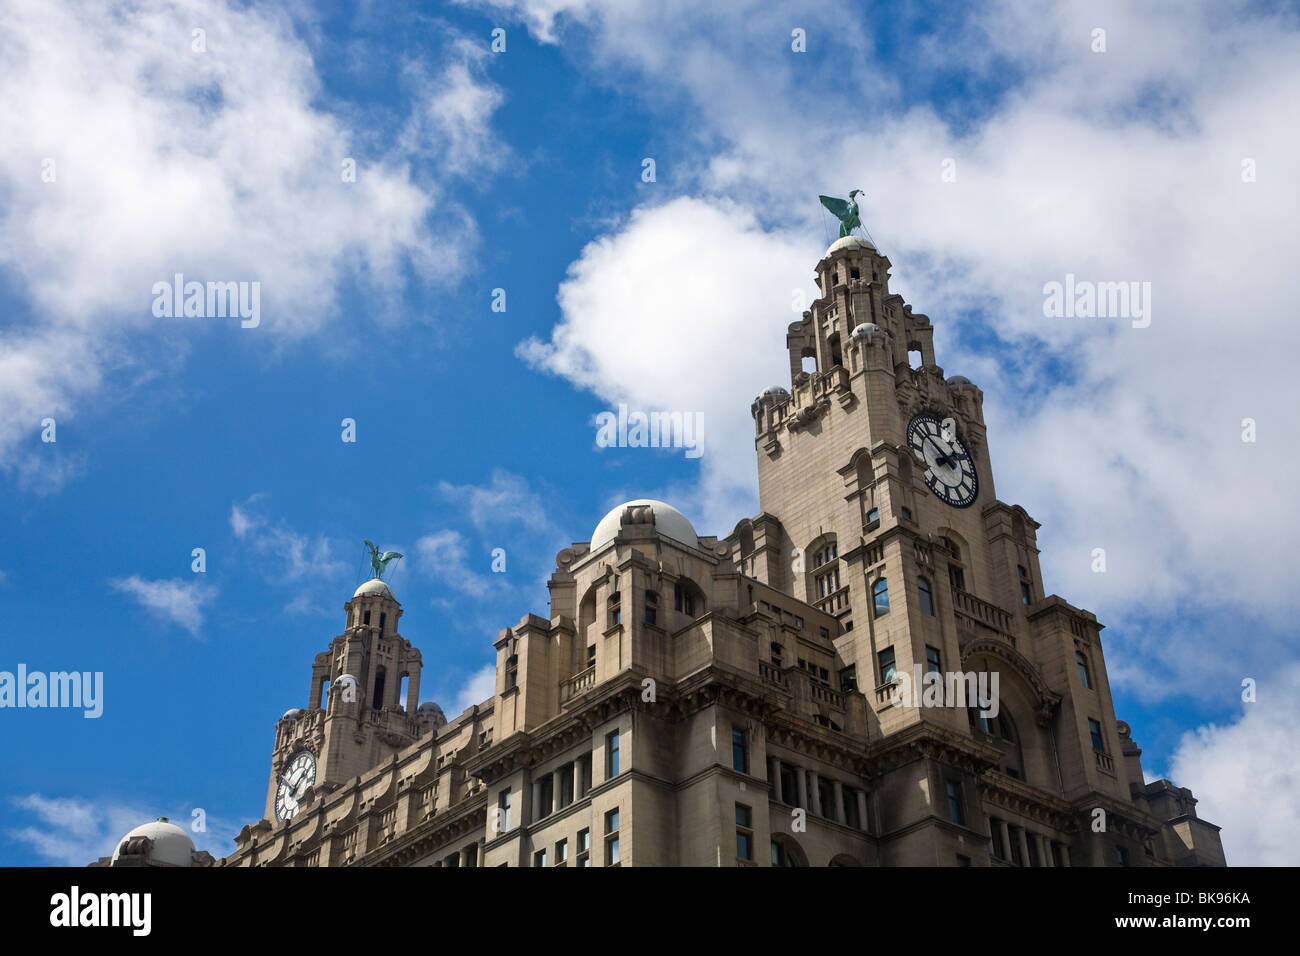 Low angle view of the clock tower of a building, Royal Liver Building, Liverpool, Merseyside, England Stock Photo